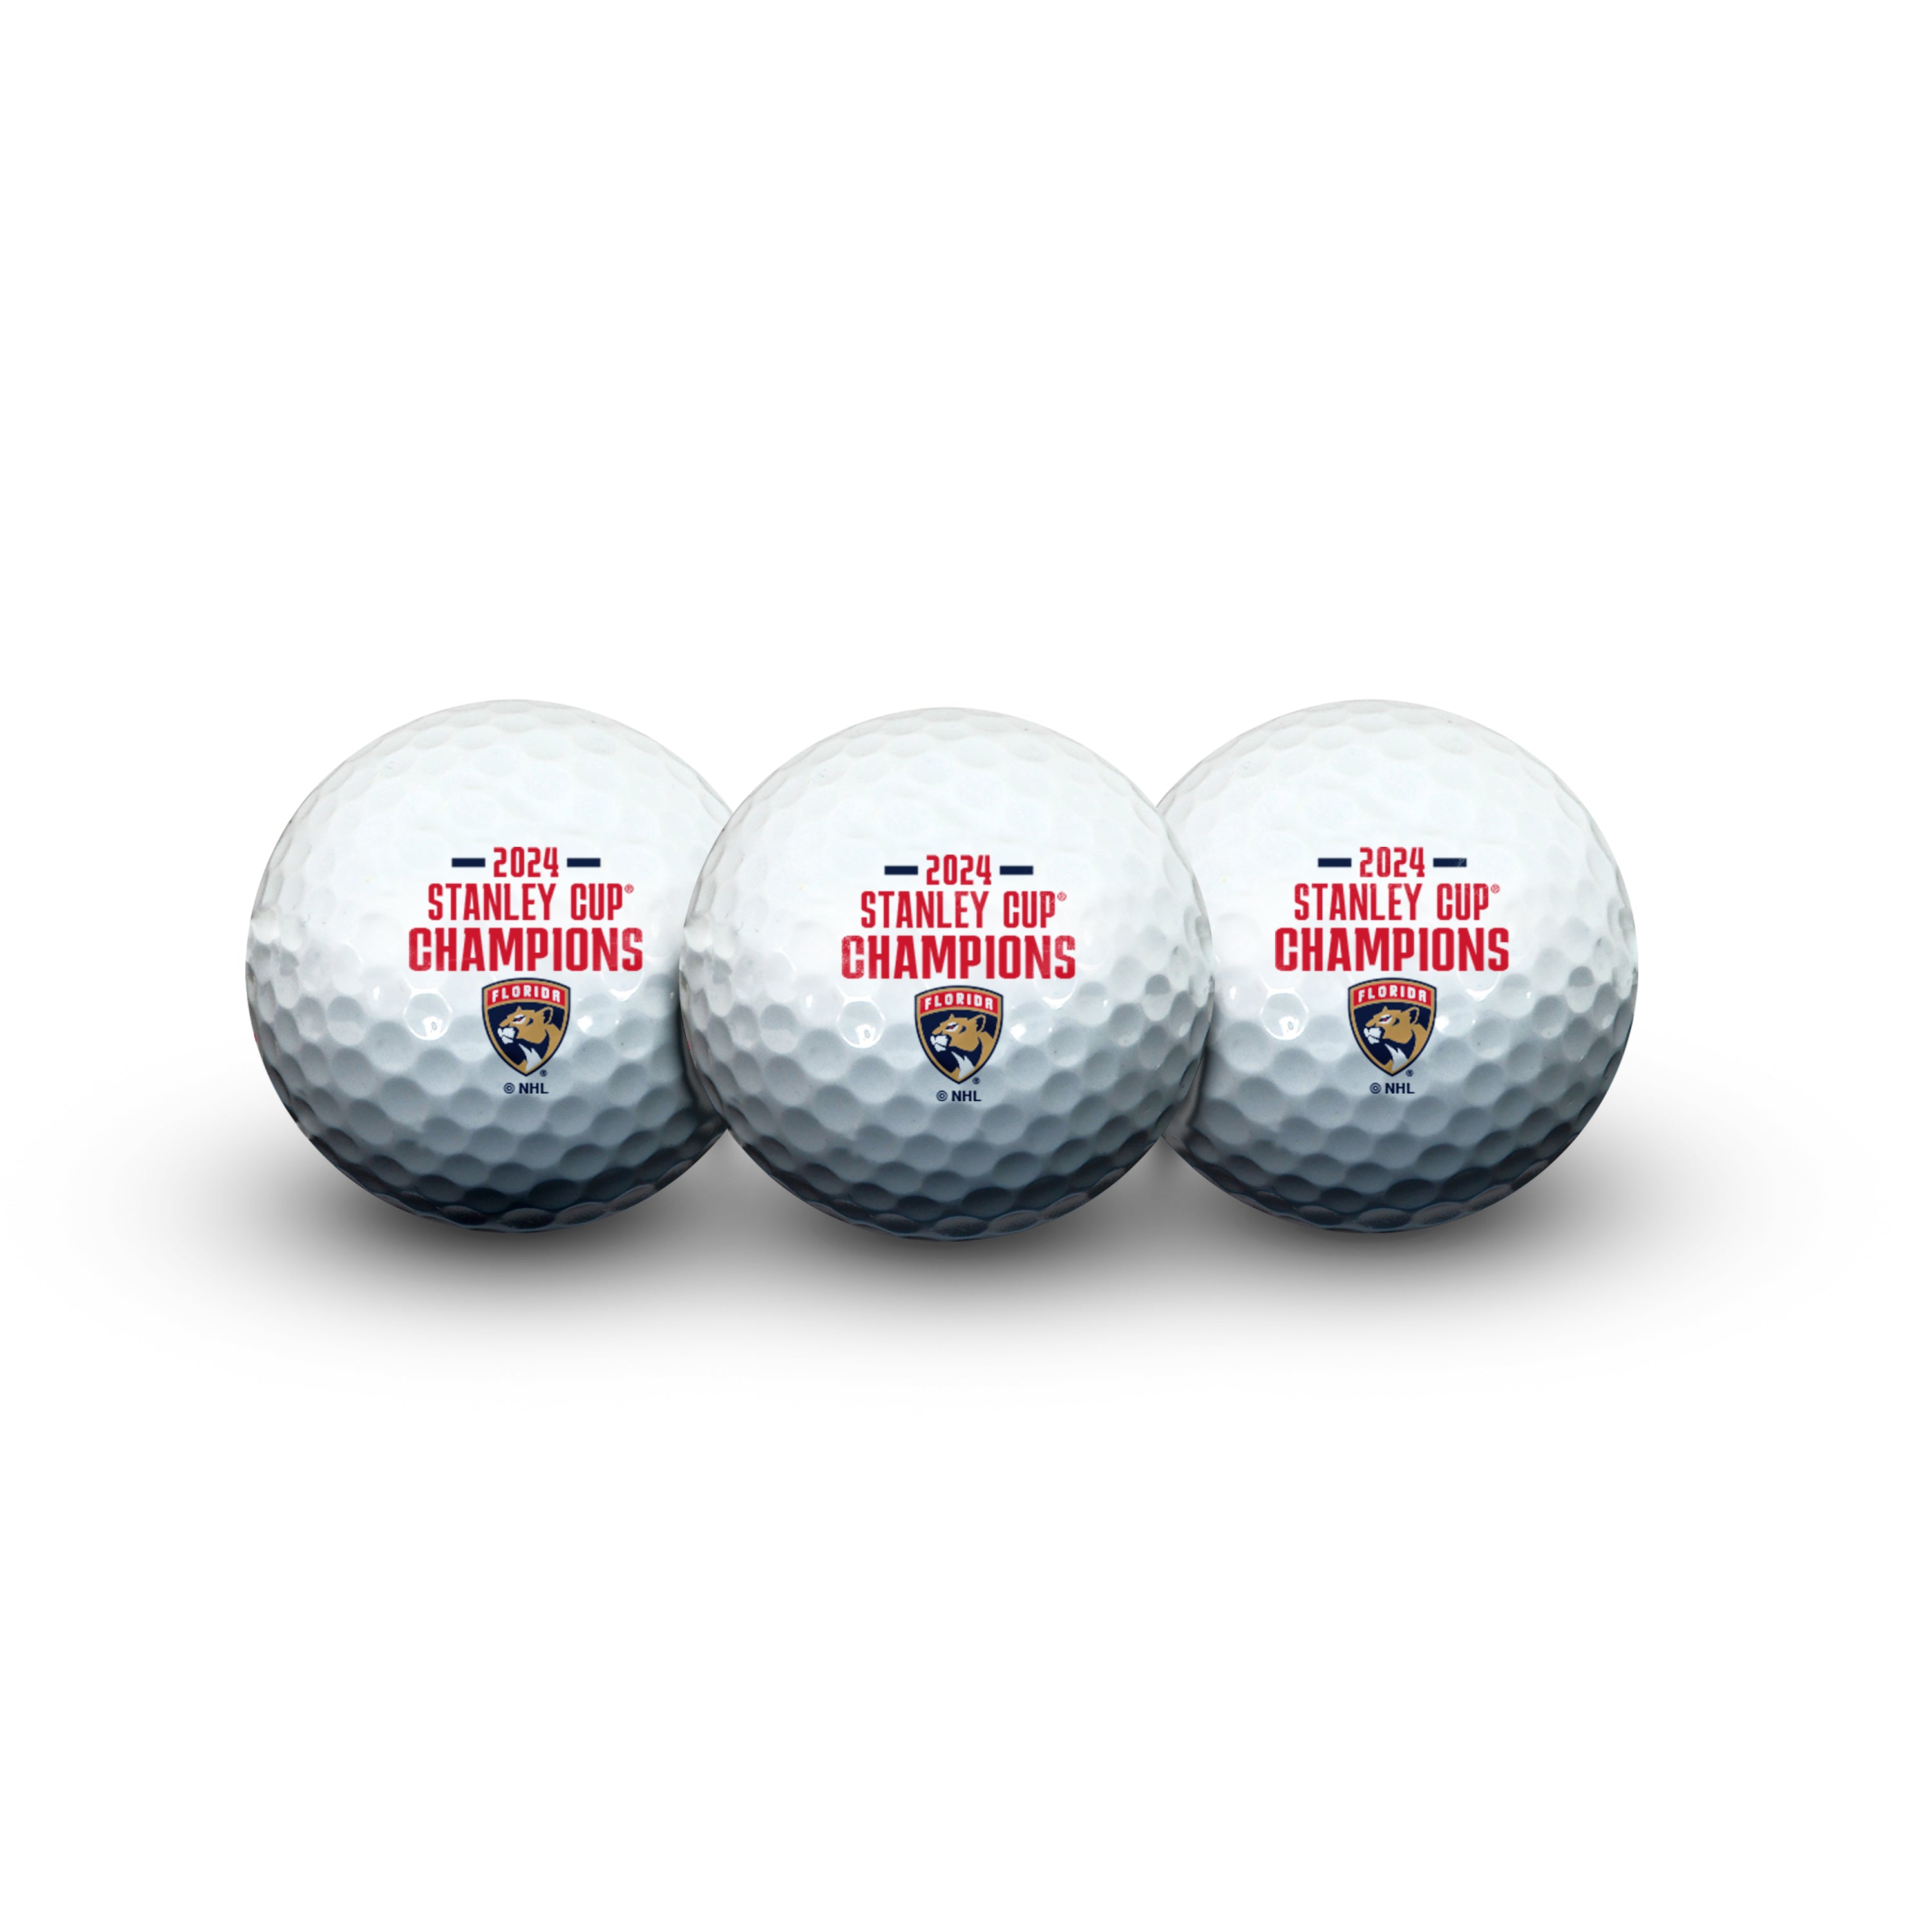 Florida Panthers 2024 Stanley Cup Champions Golf Ball Set - 3-Pack